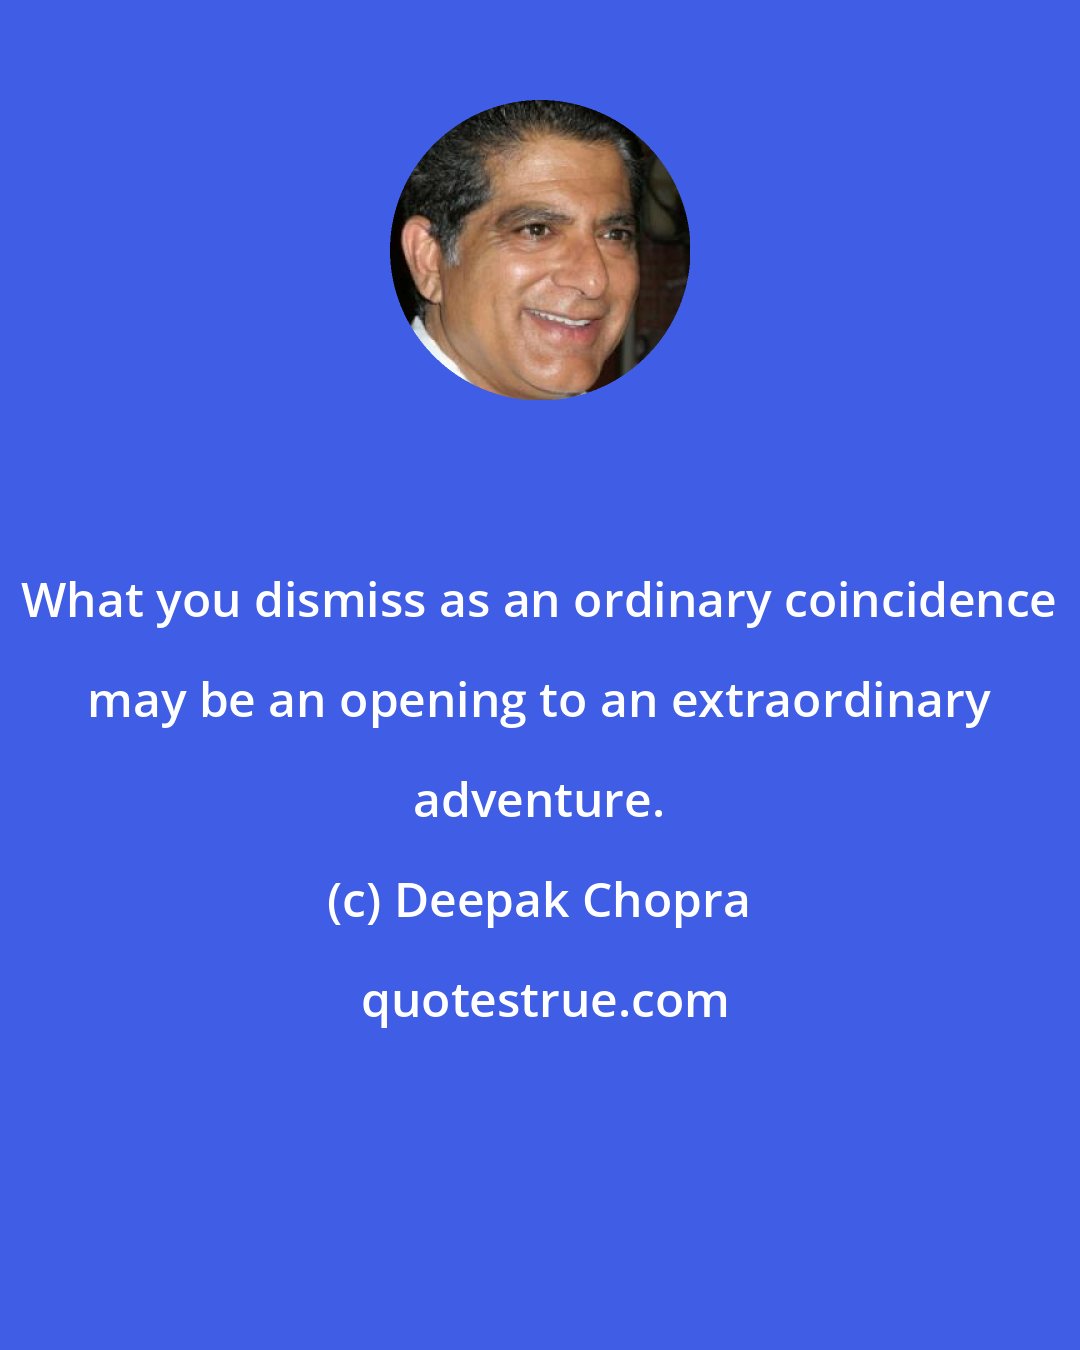 Deepak Chopra: What you dismiss as an ordinary coincidence may be an opening to an extraordinary adventure.